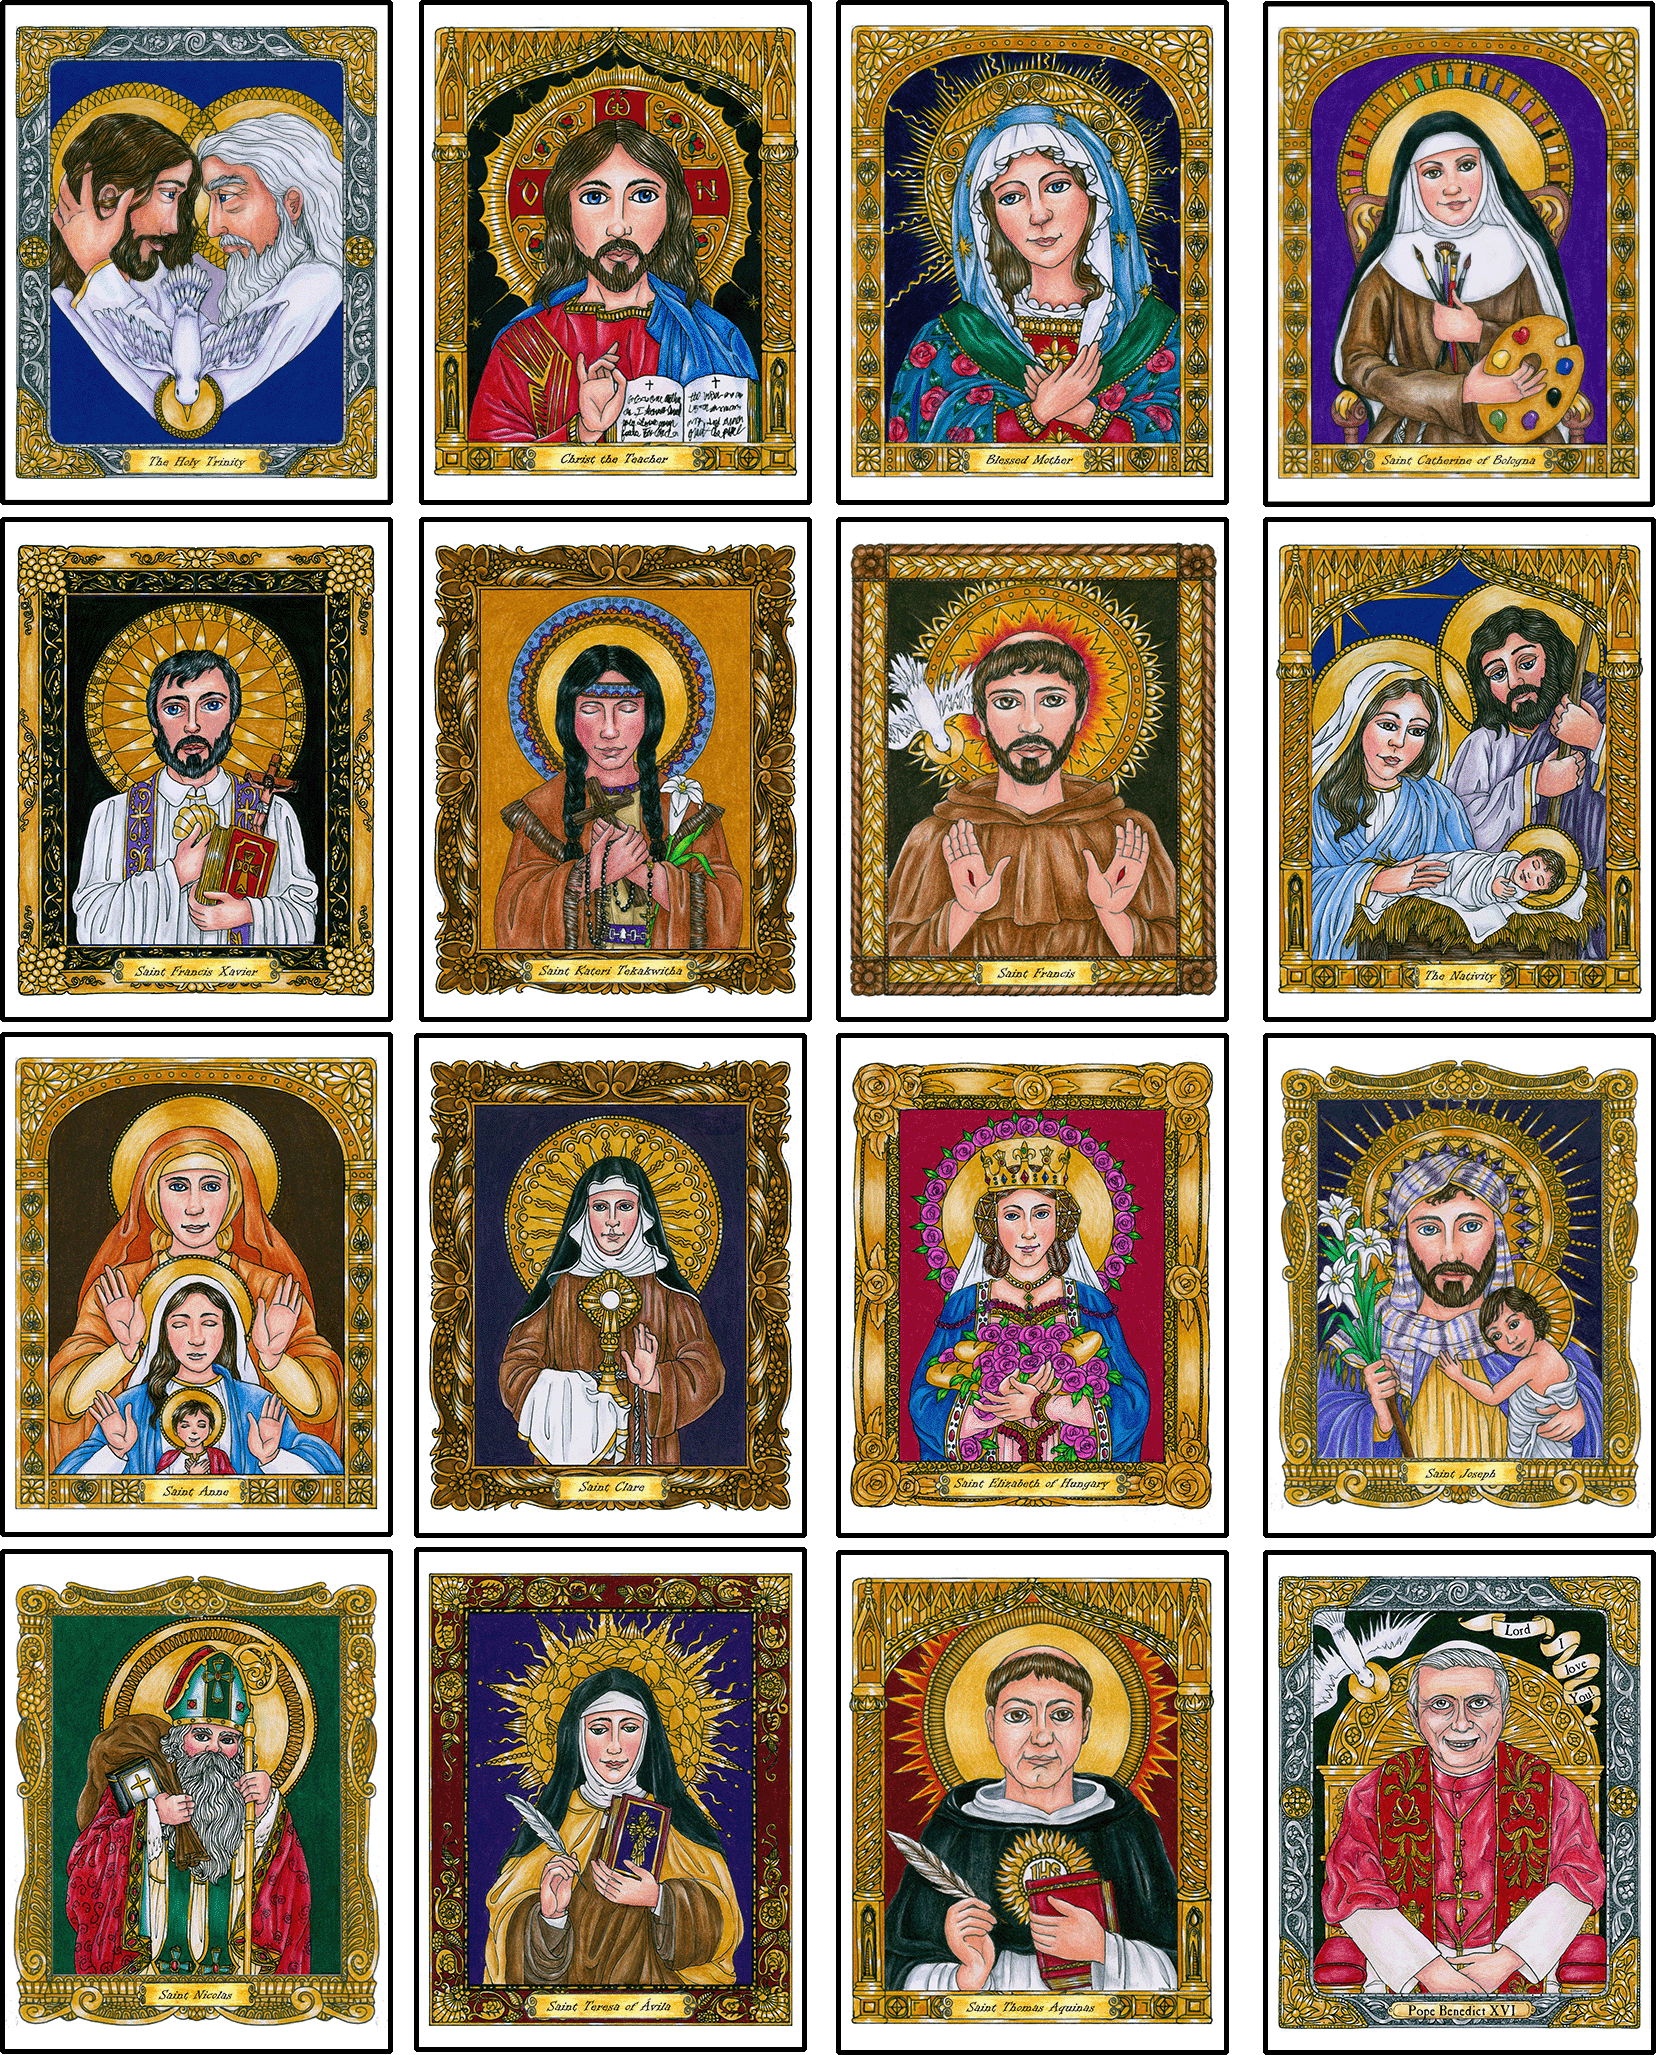 Gallery of Saints Set 1 Classroom Cards